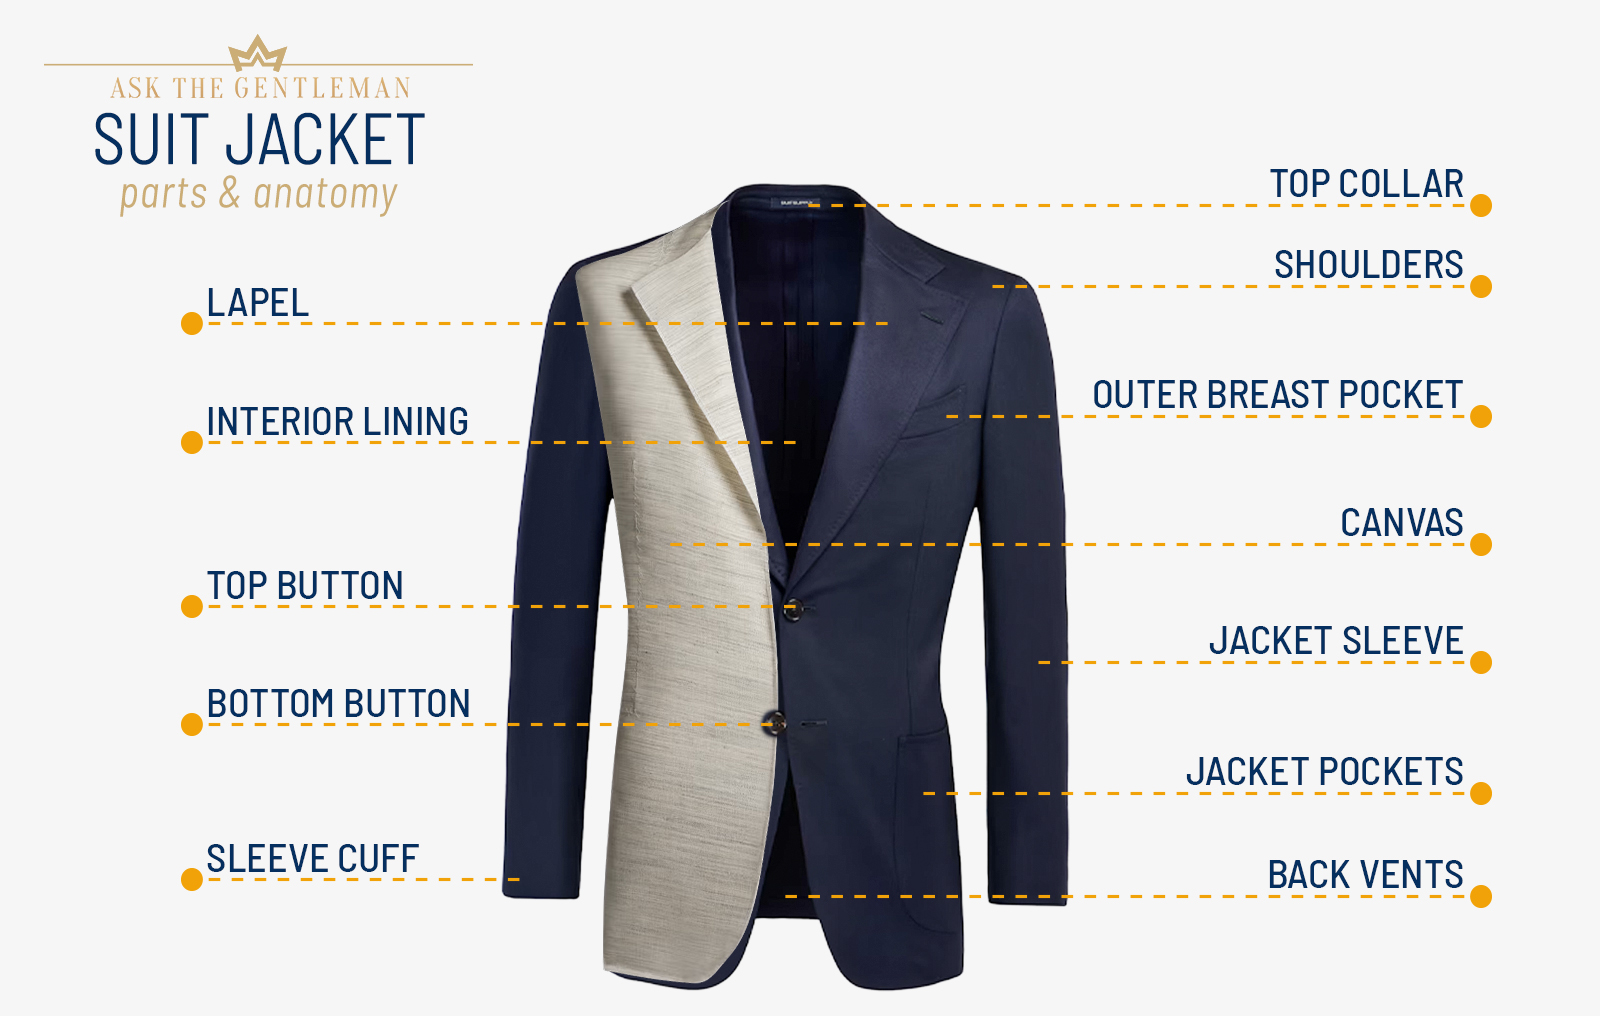 Different suit jacket parts and anatomy